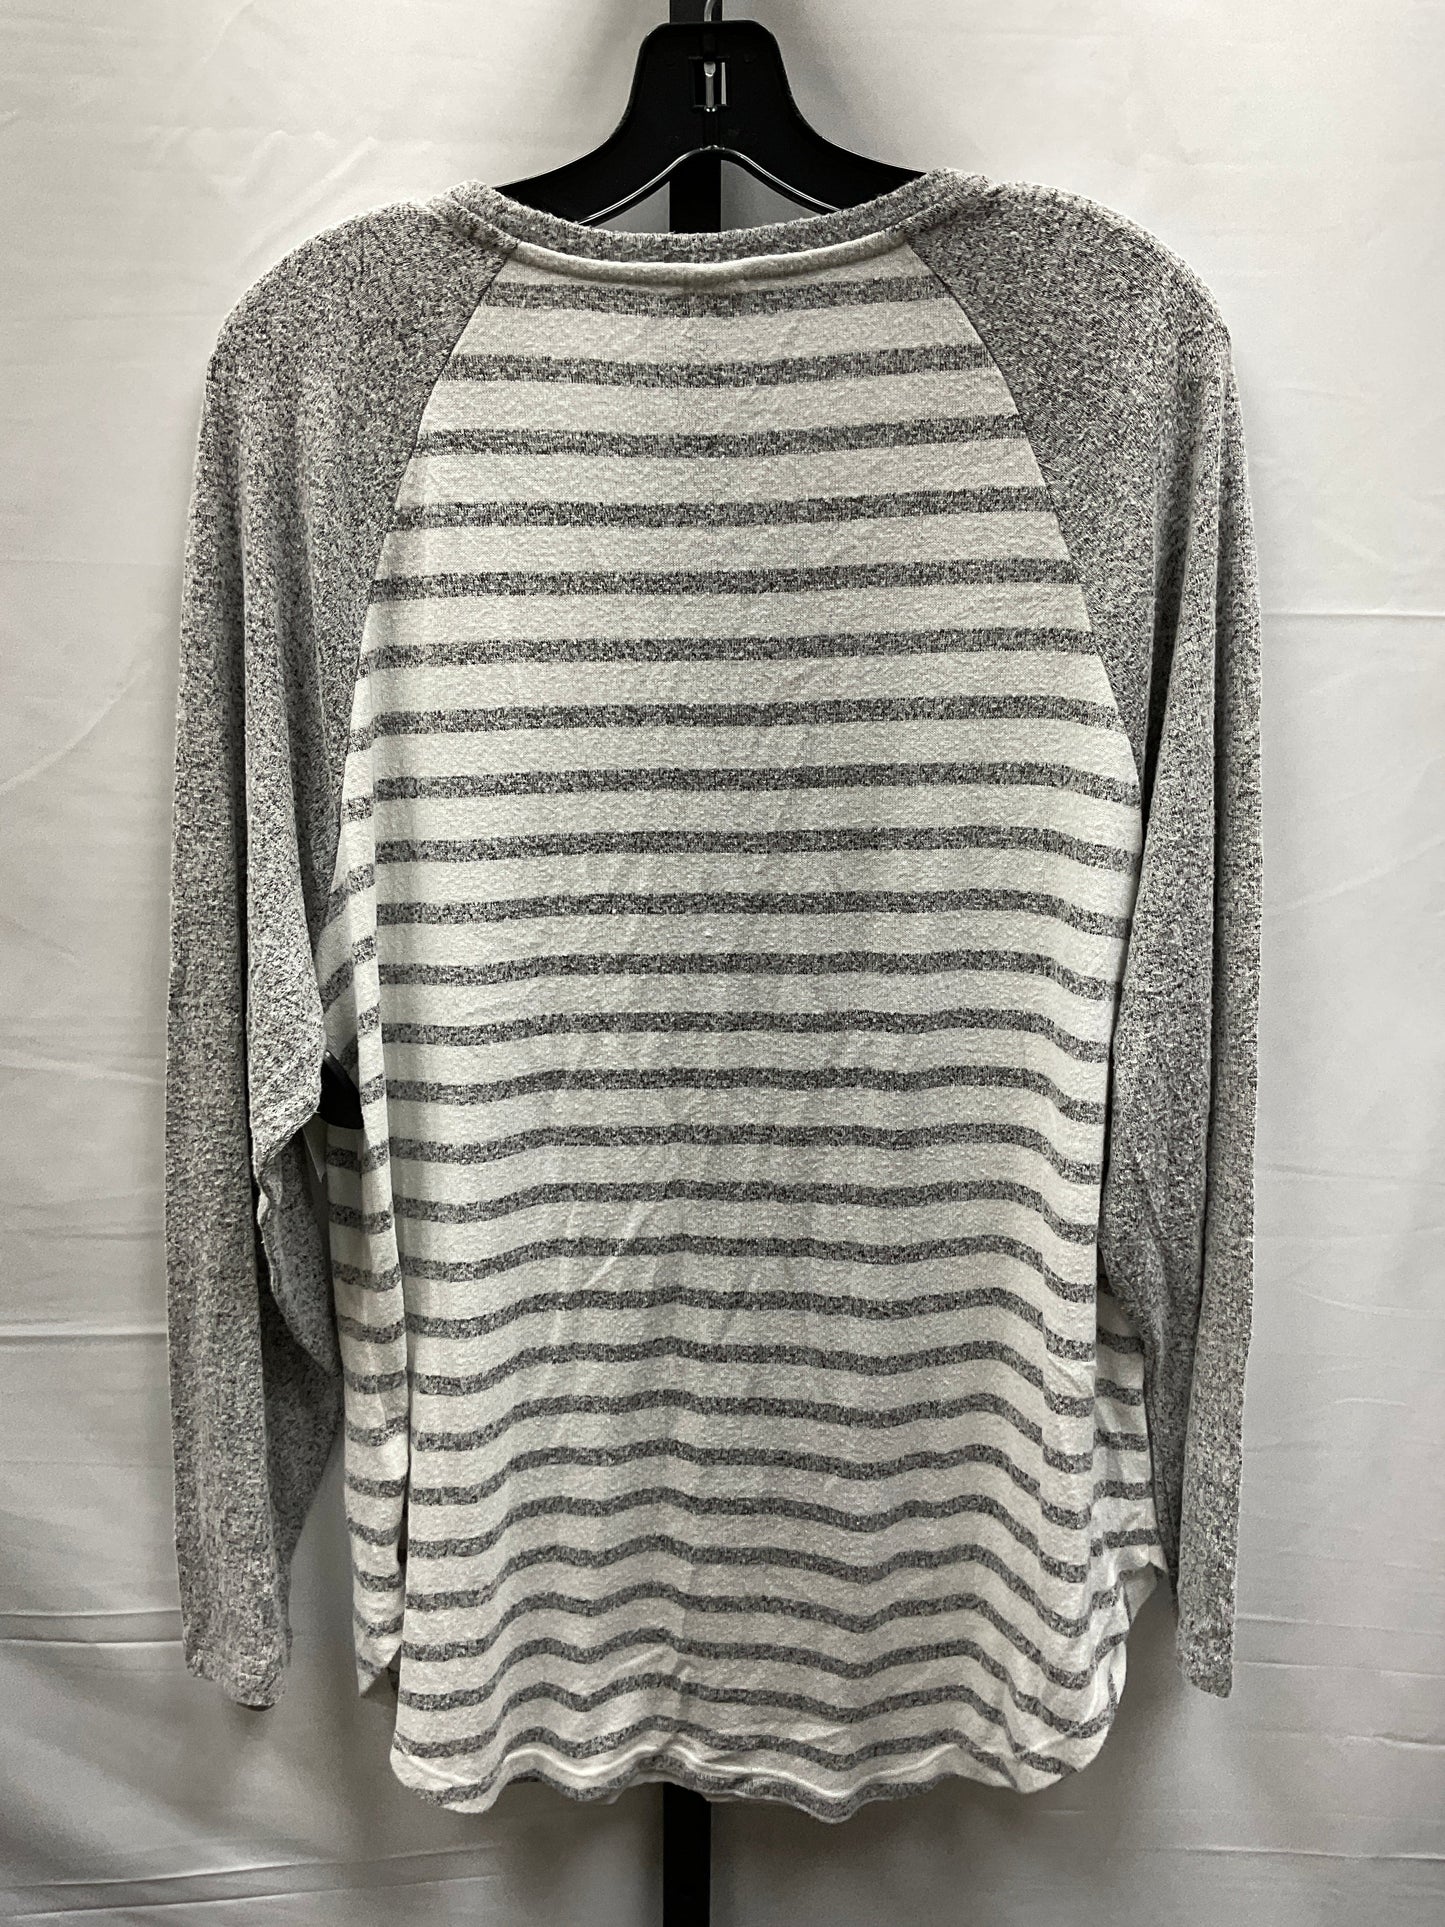 Grey & White Top Long Sleeve Old Navy, Size Xl